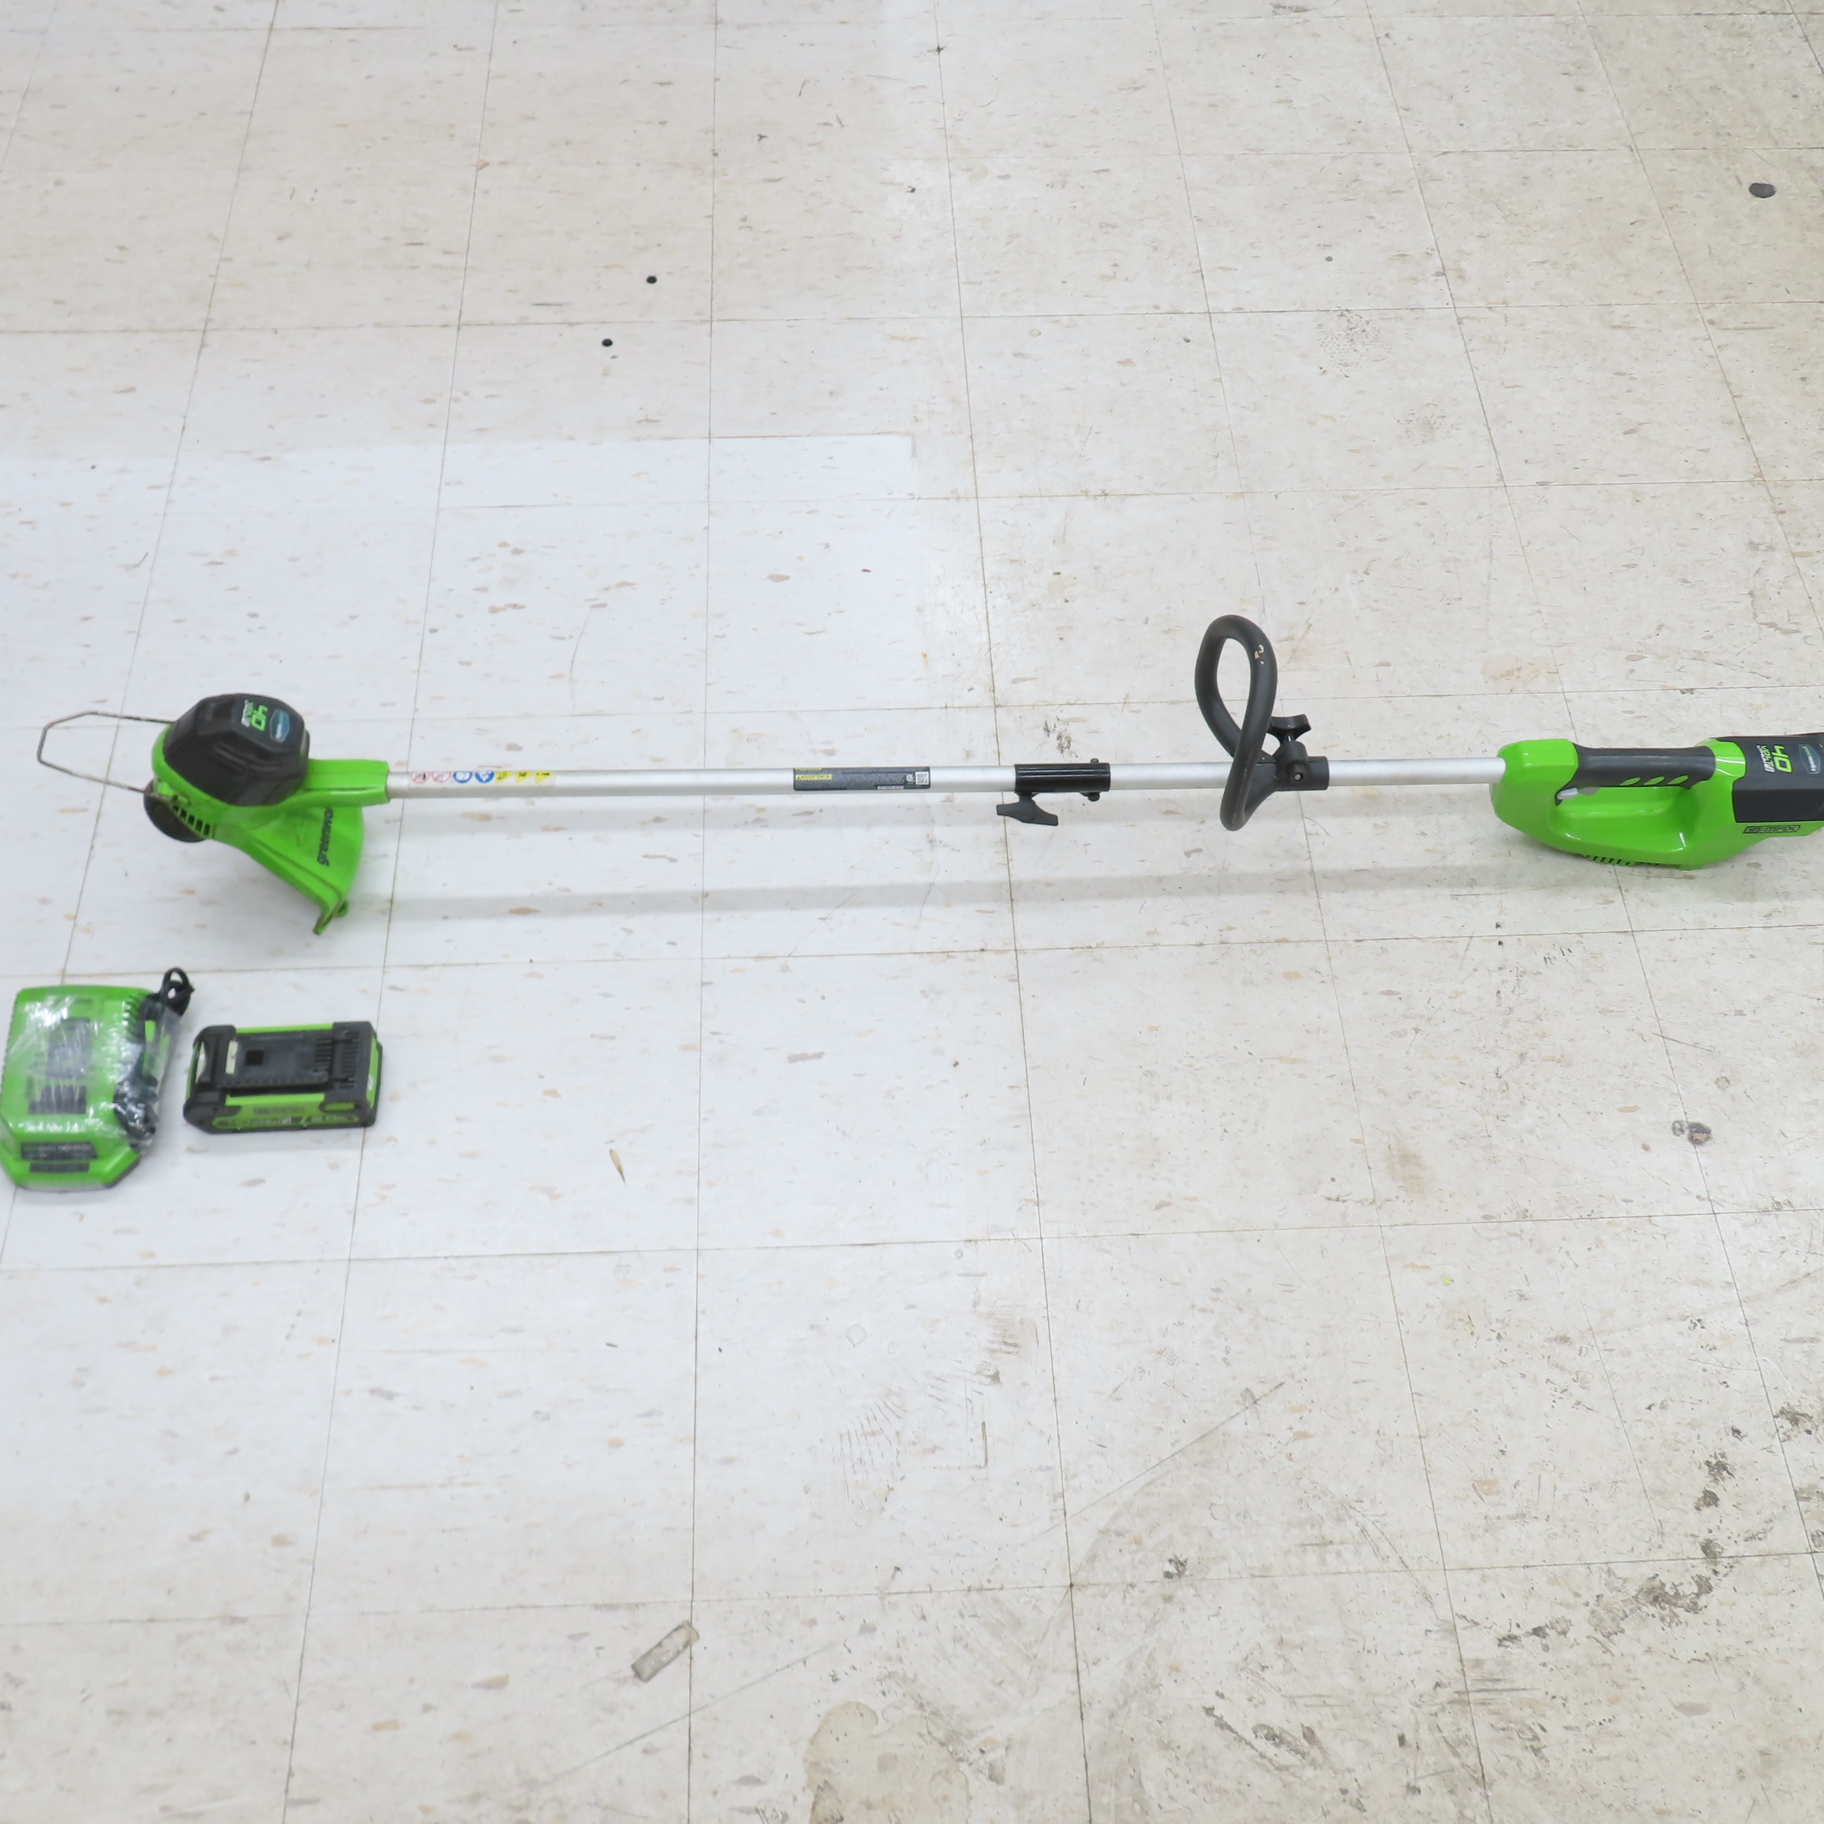 Greenworks 40V 12 Cordless String Trimmer, 2.0Ah Battery and Charger  Included